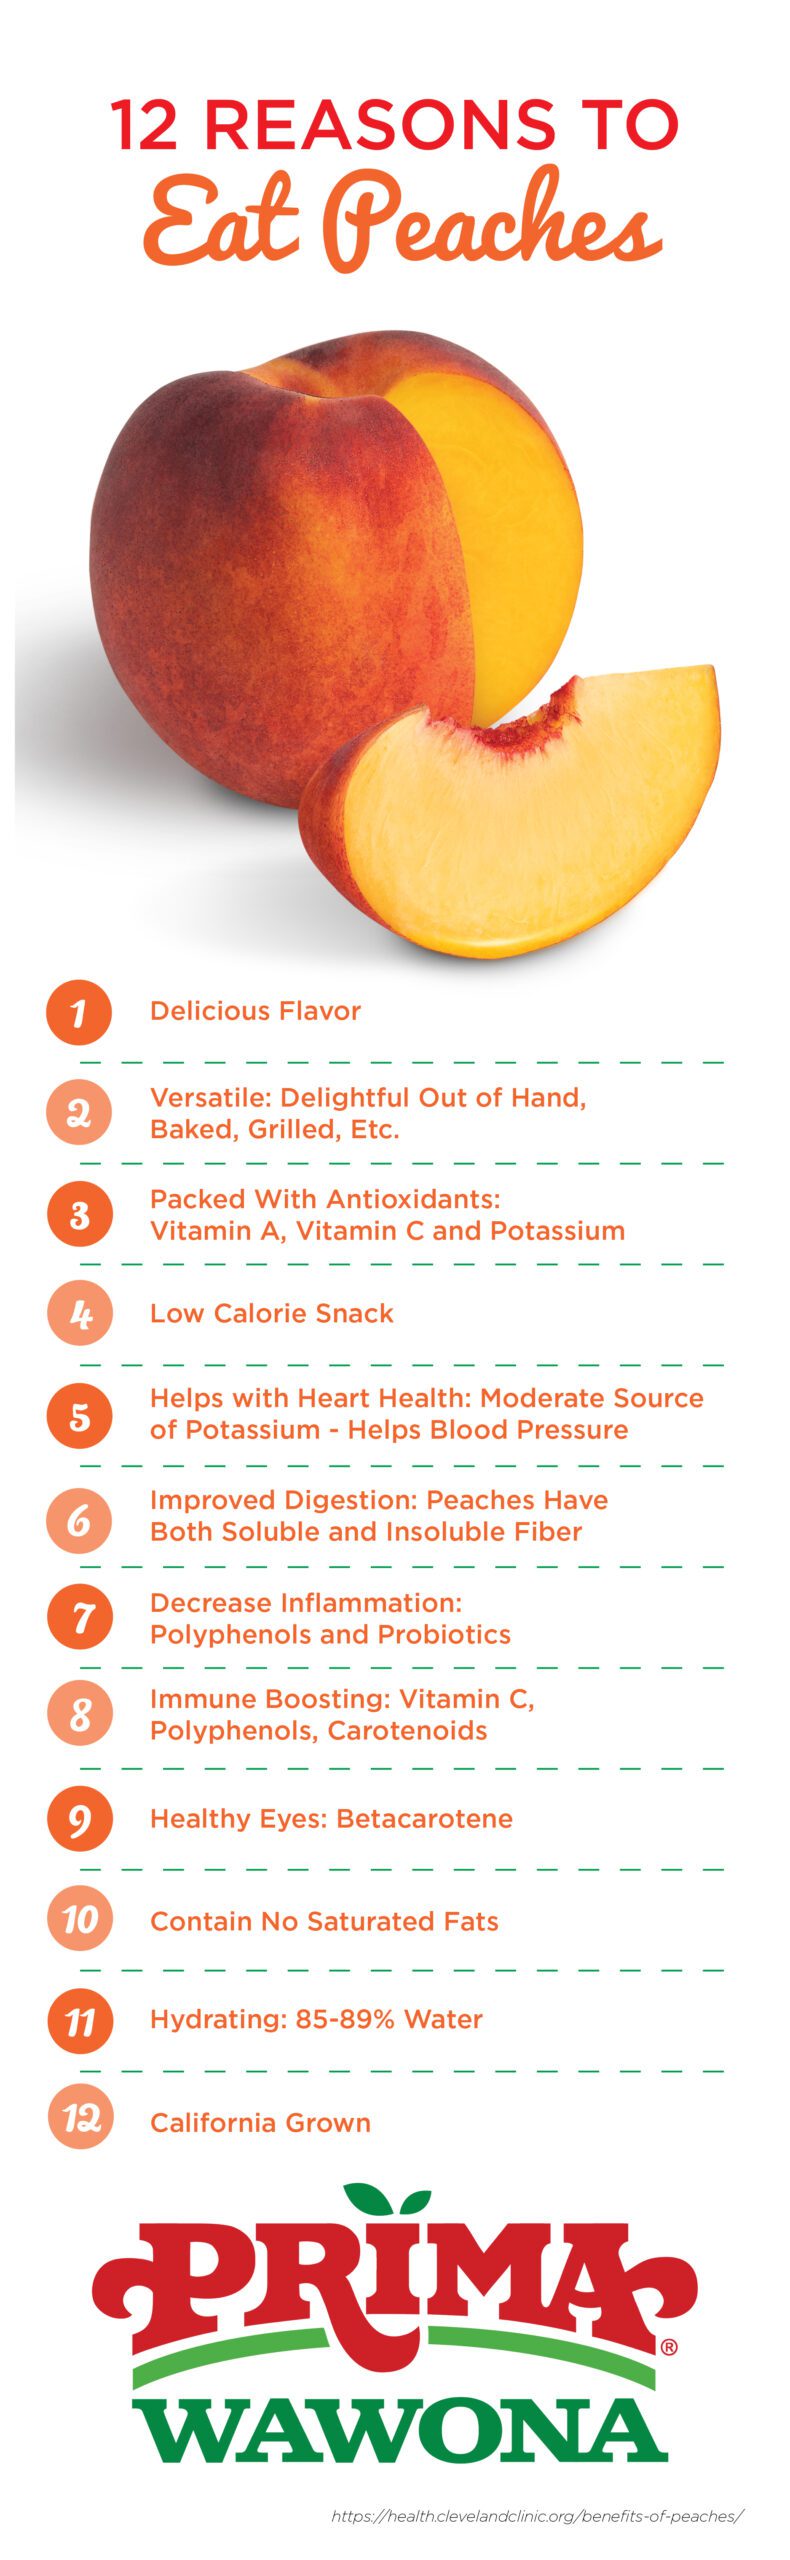 12 Reasons to Eat Peaches Infographic